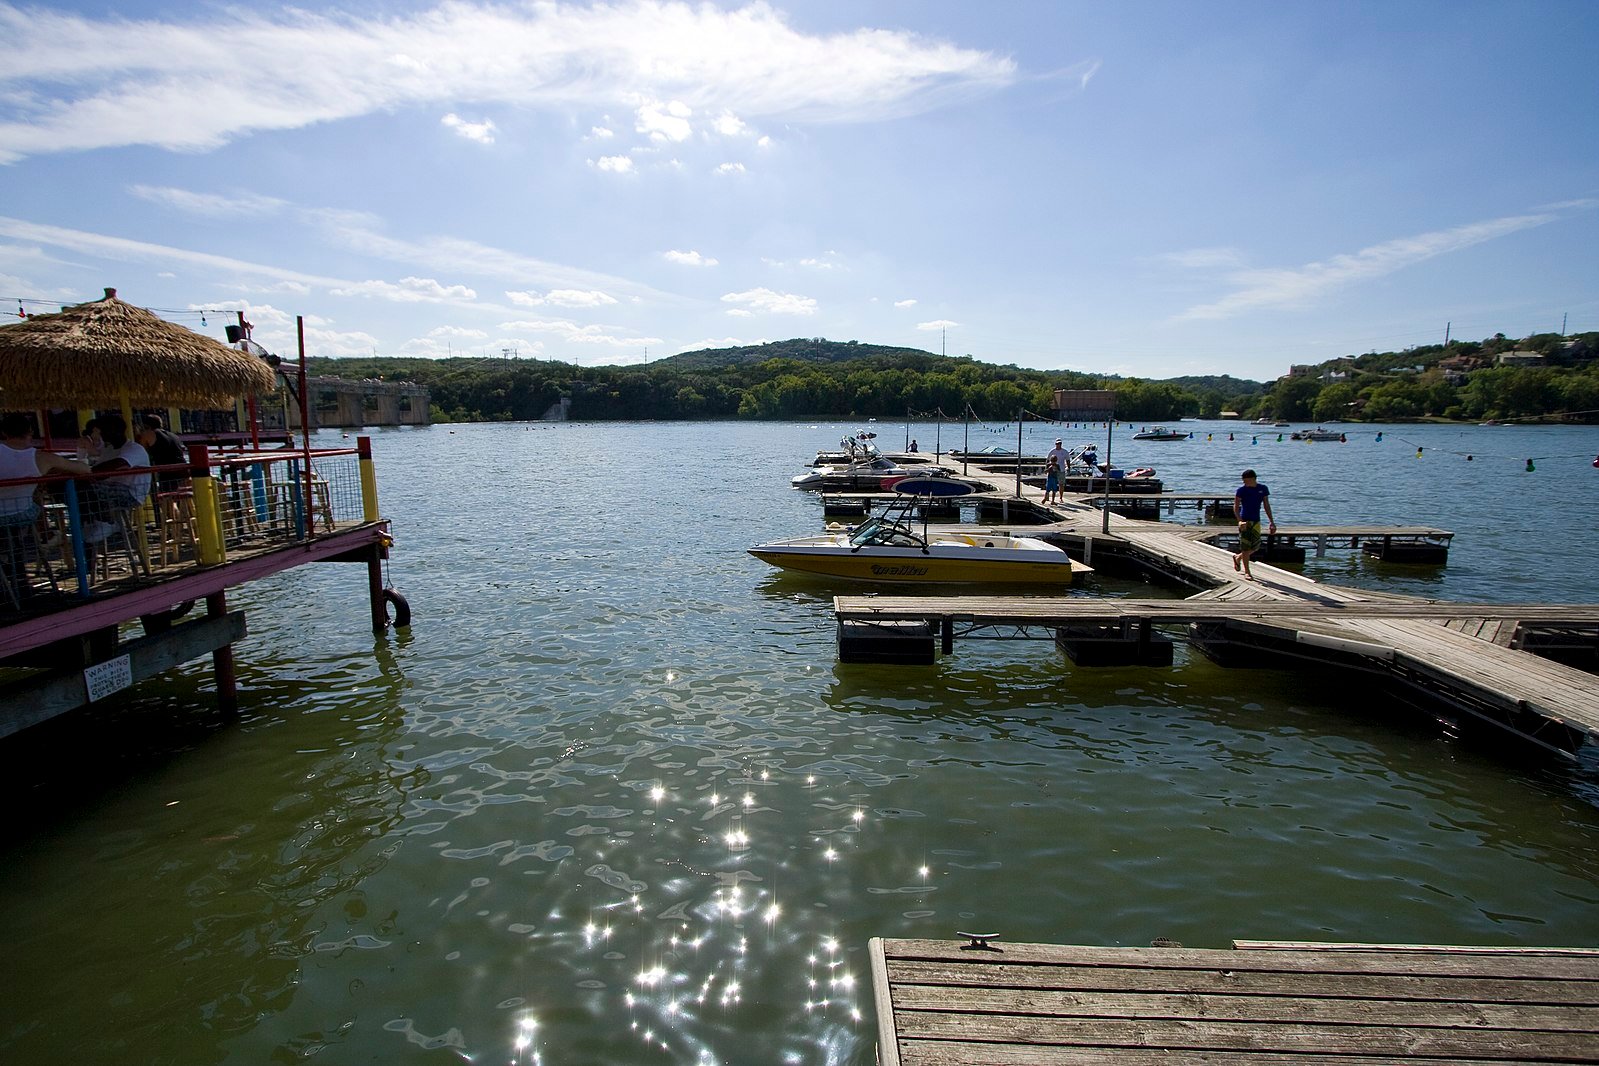 Some restaurants on Lake Austin have parking available for boaters